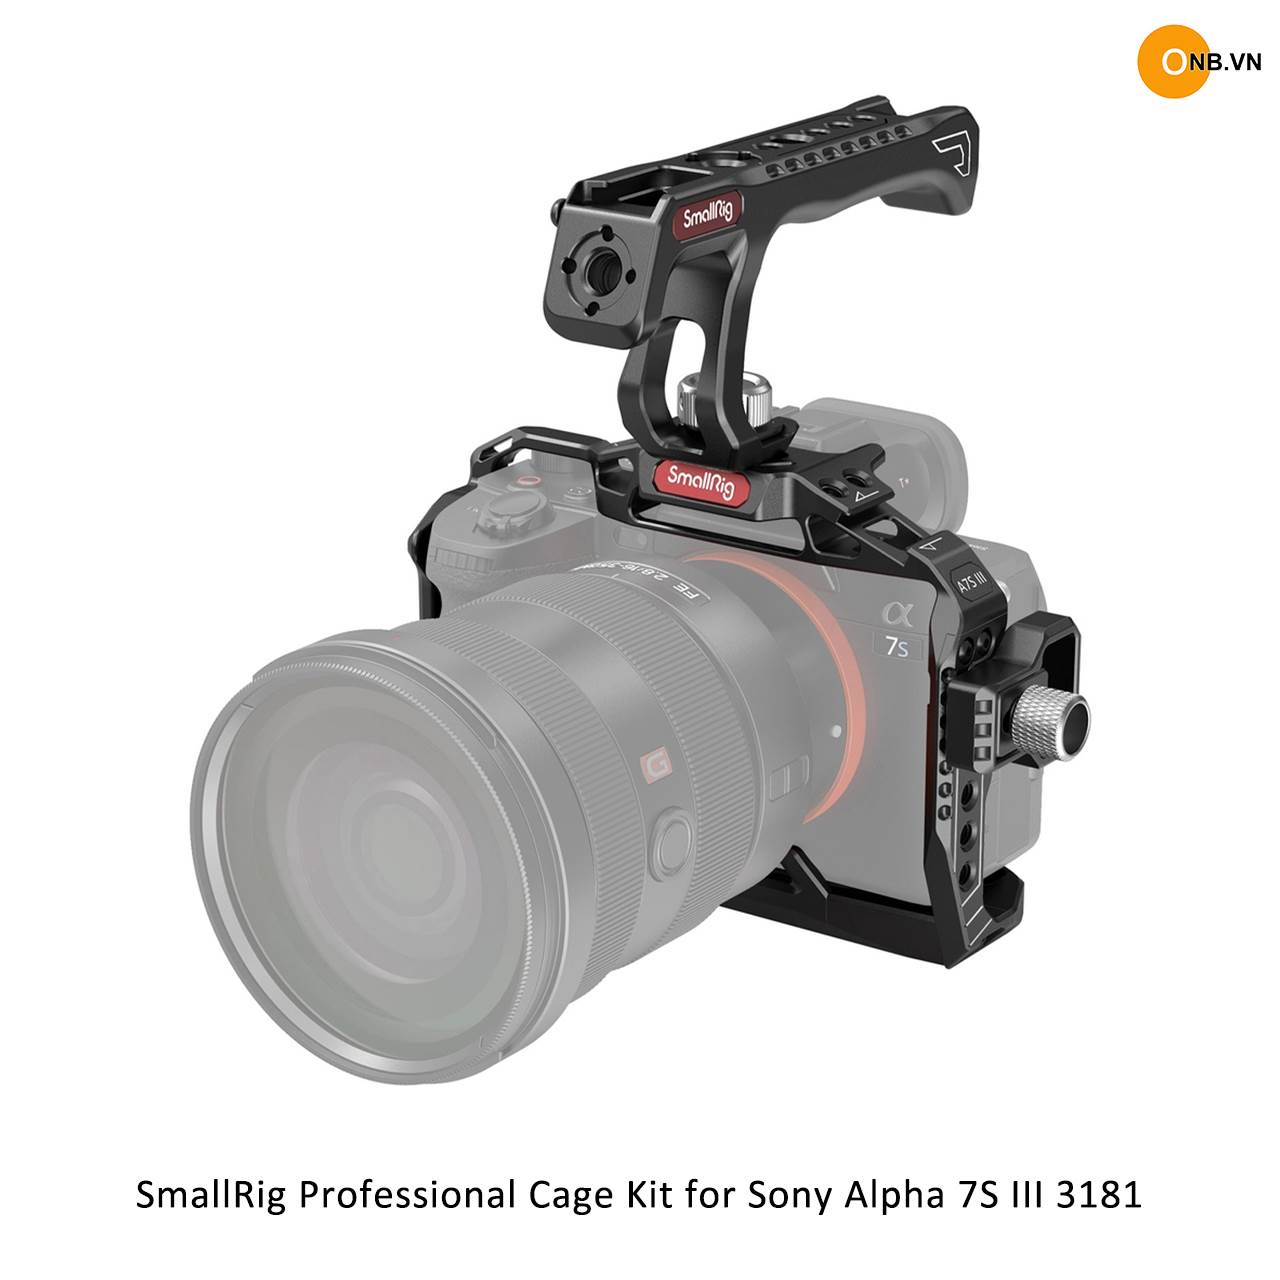 SmallRig Professional Cage Kit for Sony Alpha A7S3 A7SIII 3181